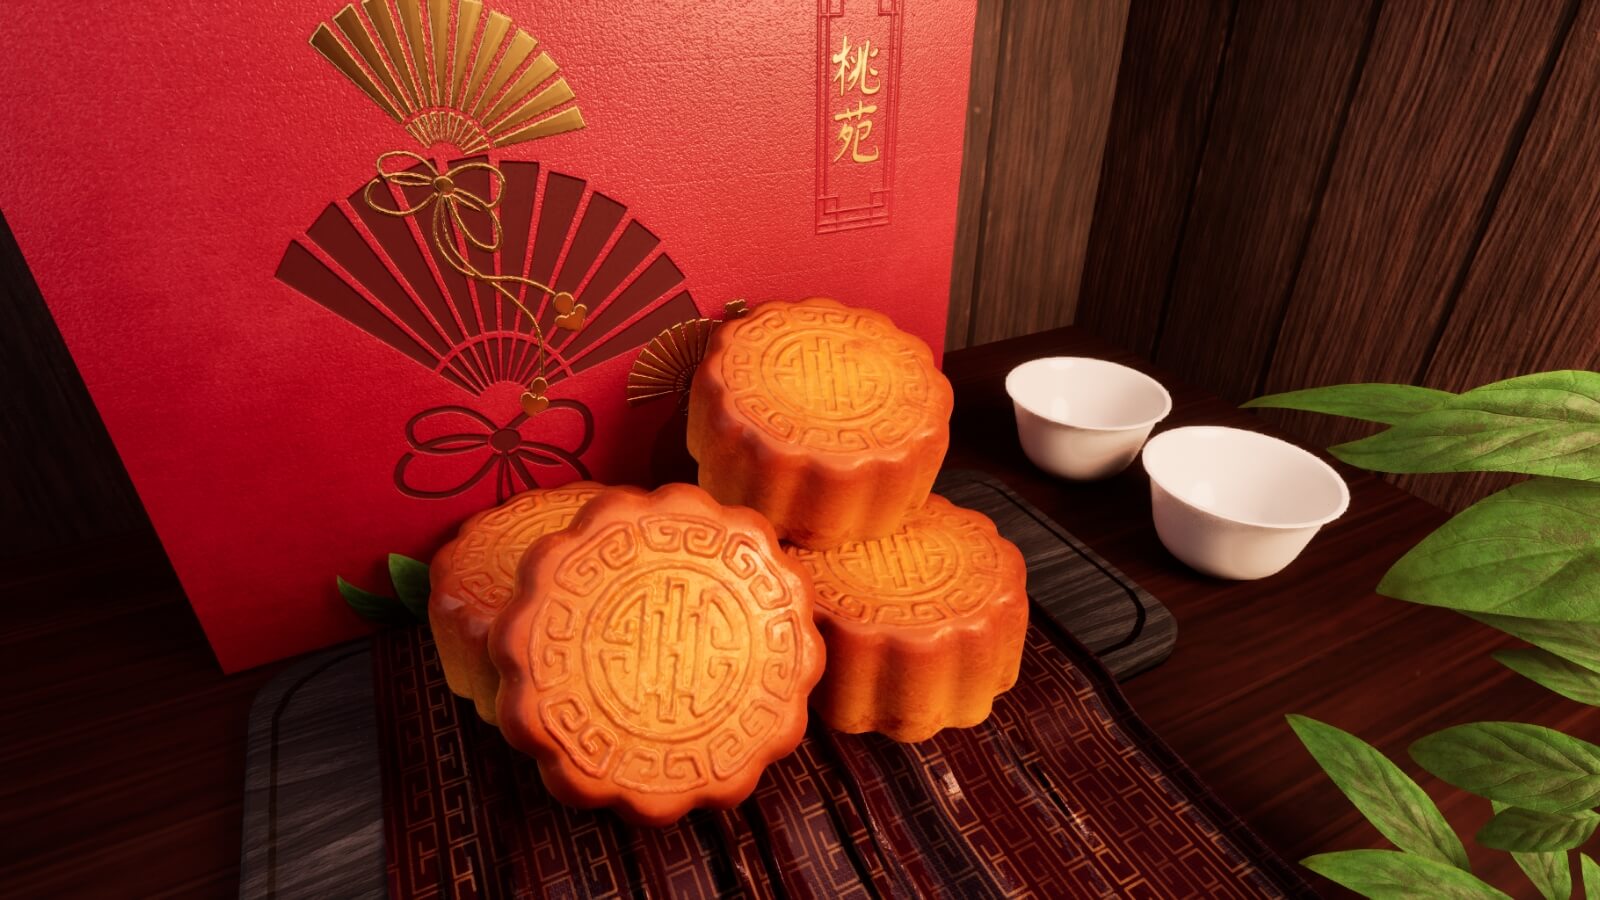 A close up of mooncakes and cups in front of a red box.